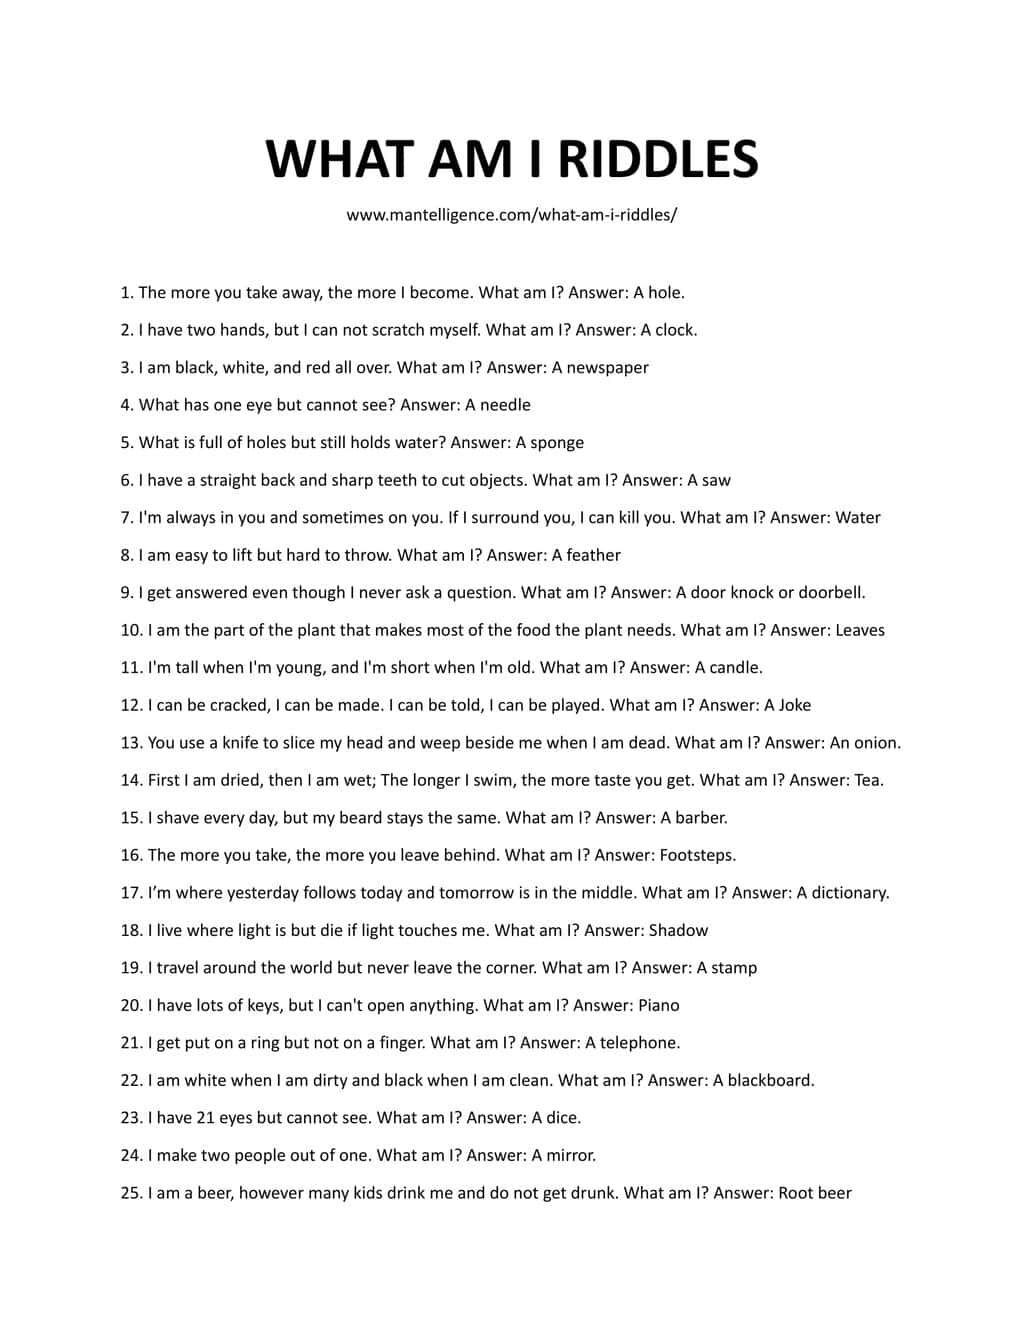 Downloadable list of riddles